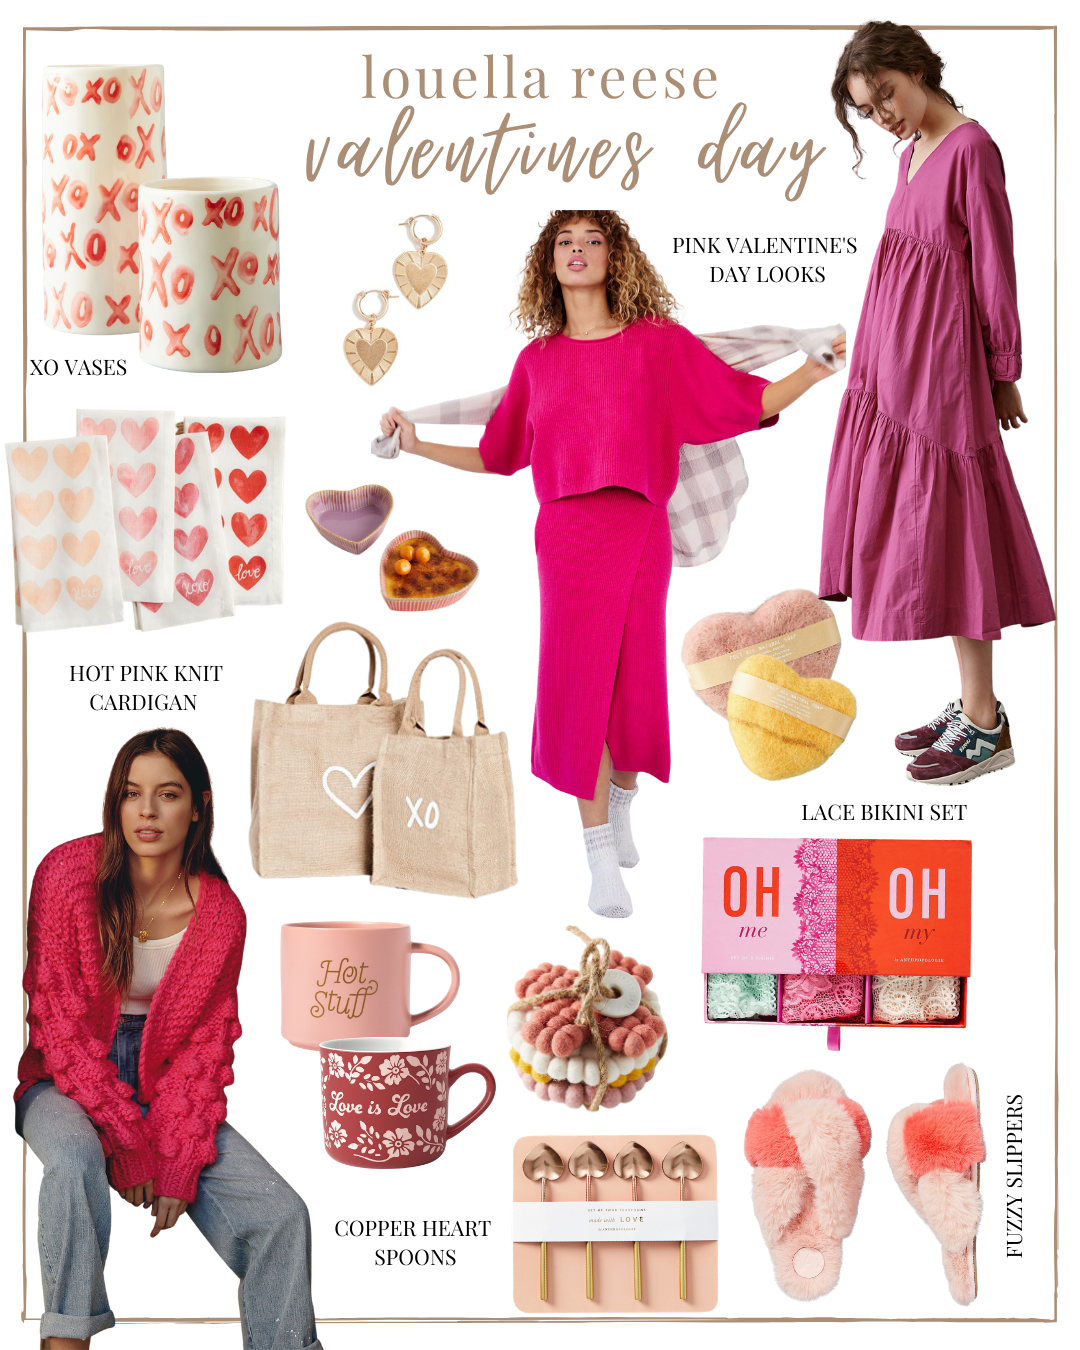 Valentines Day Gift Guide for Her | pink gifts | lifestyle | Louella Reese